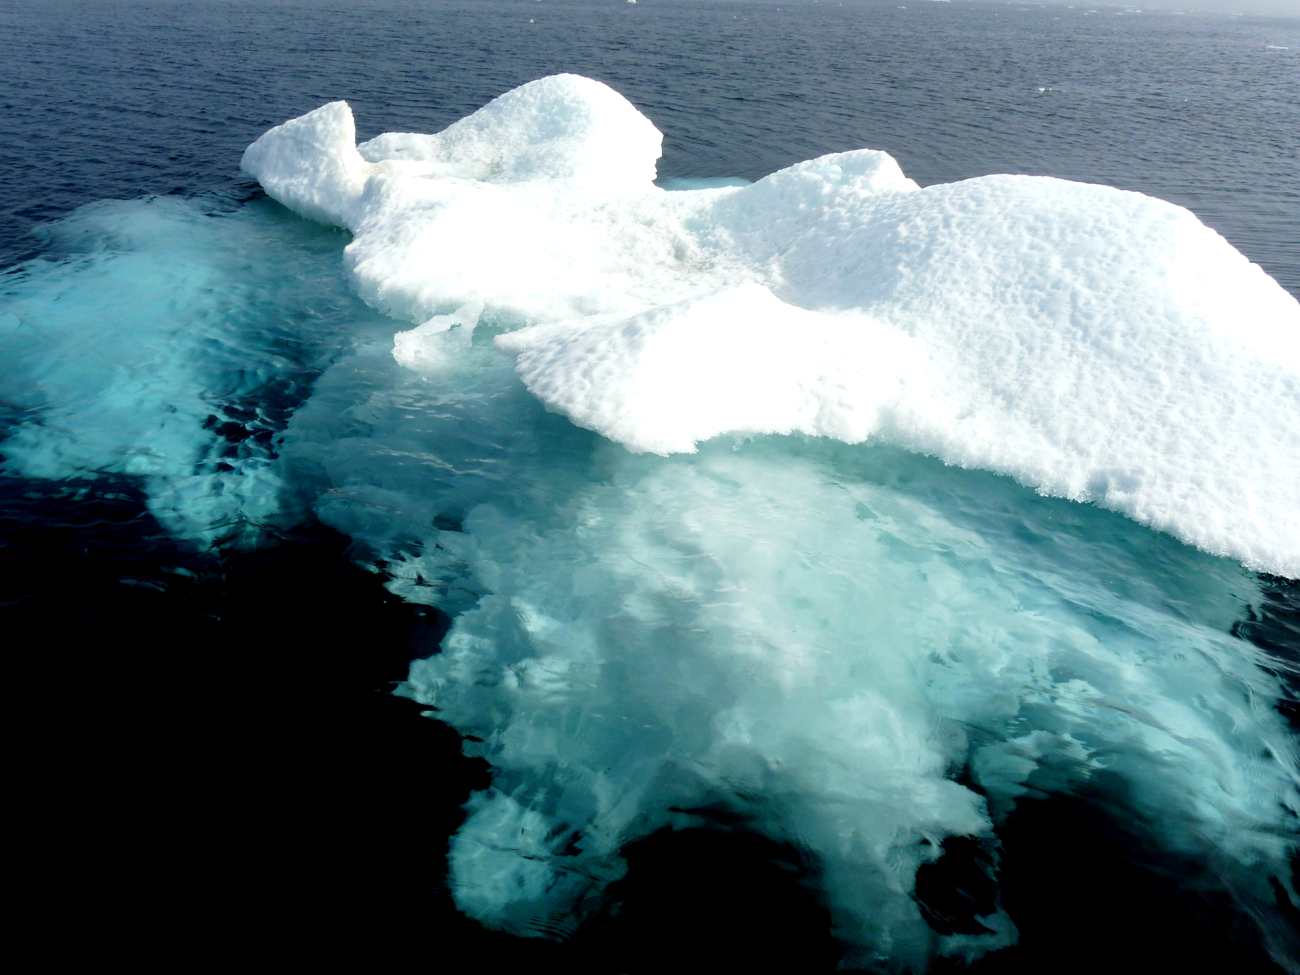 A small ice berg with its greater mass of ice visible below the surface